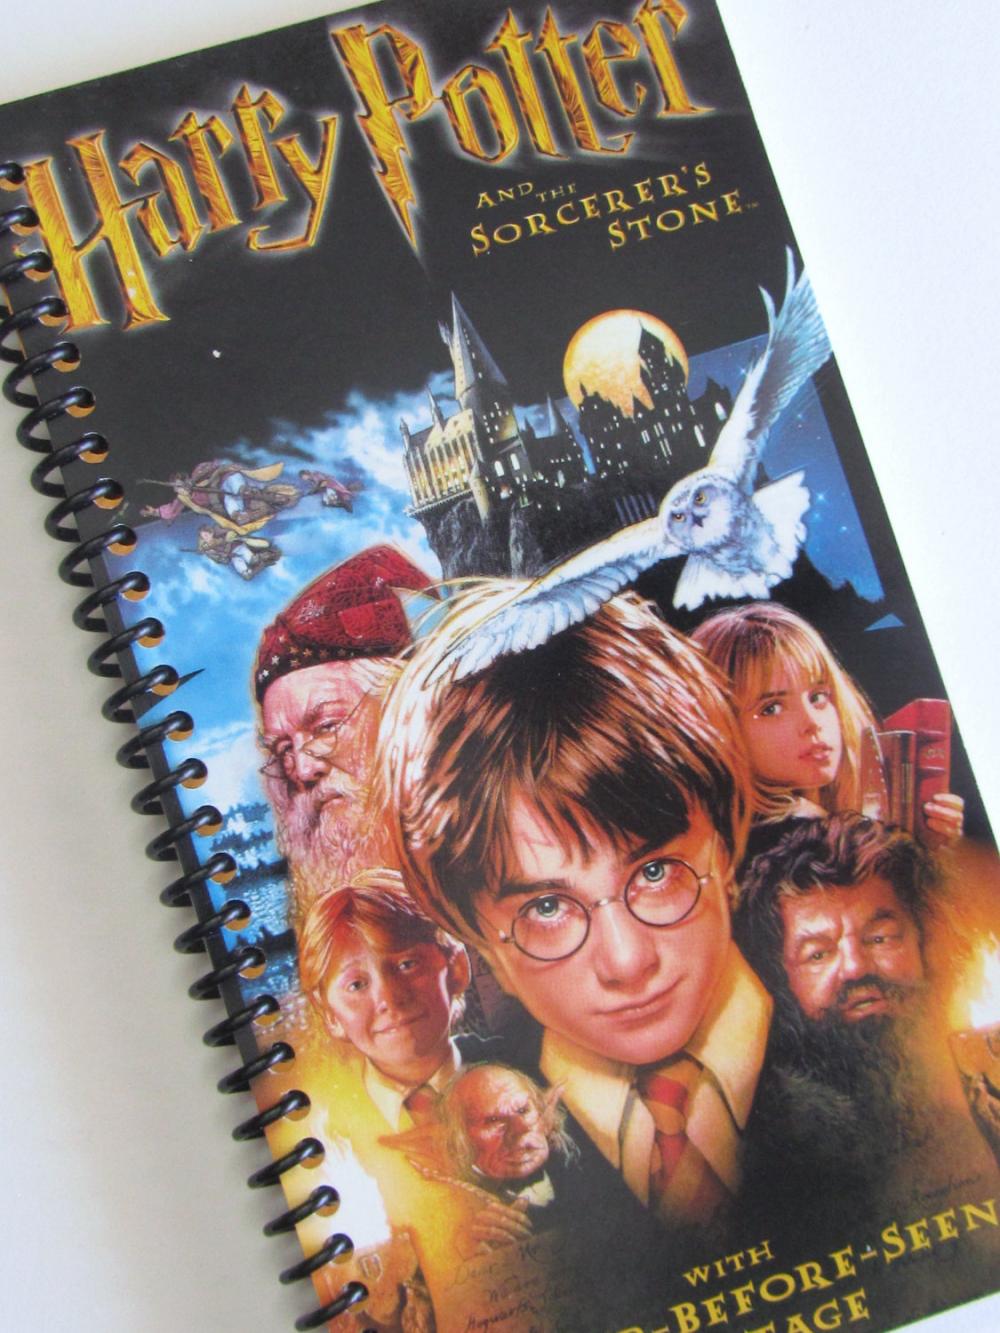 Harry Potter Notebook Journal Upcycled Spiral Notebook Recyled Earth Friendly Made From An Actual Vhs Movie Cover Sorcerer's Stone